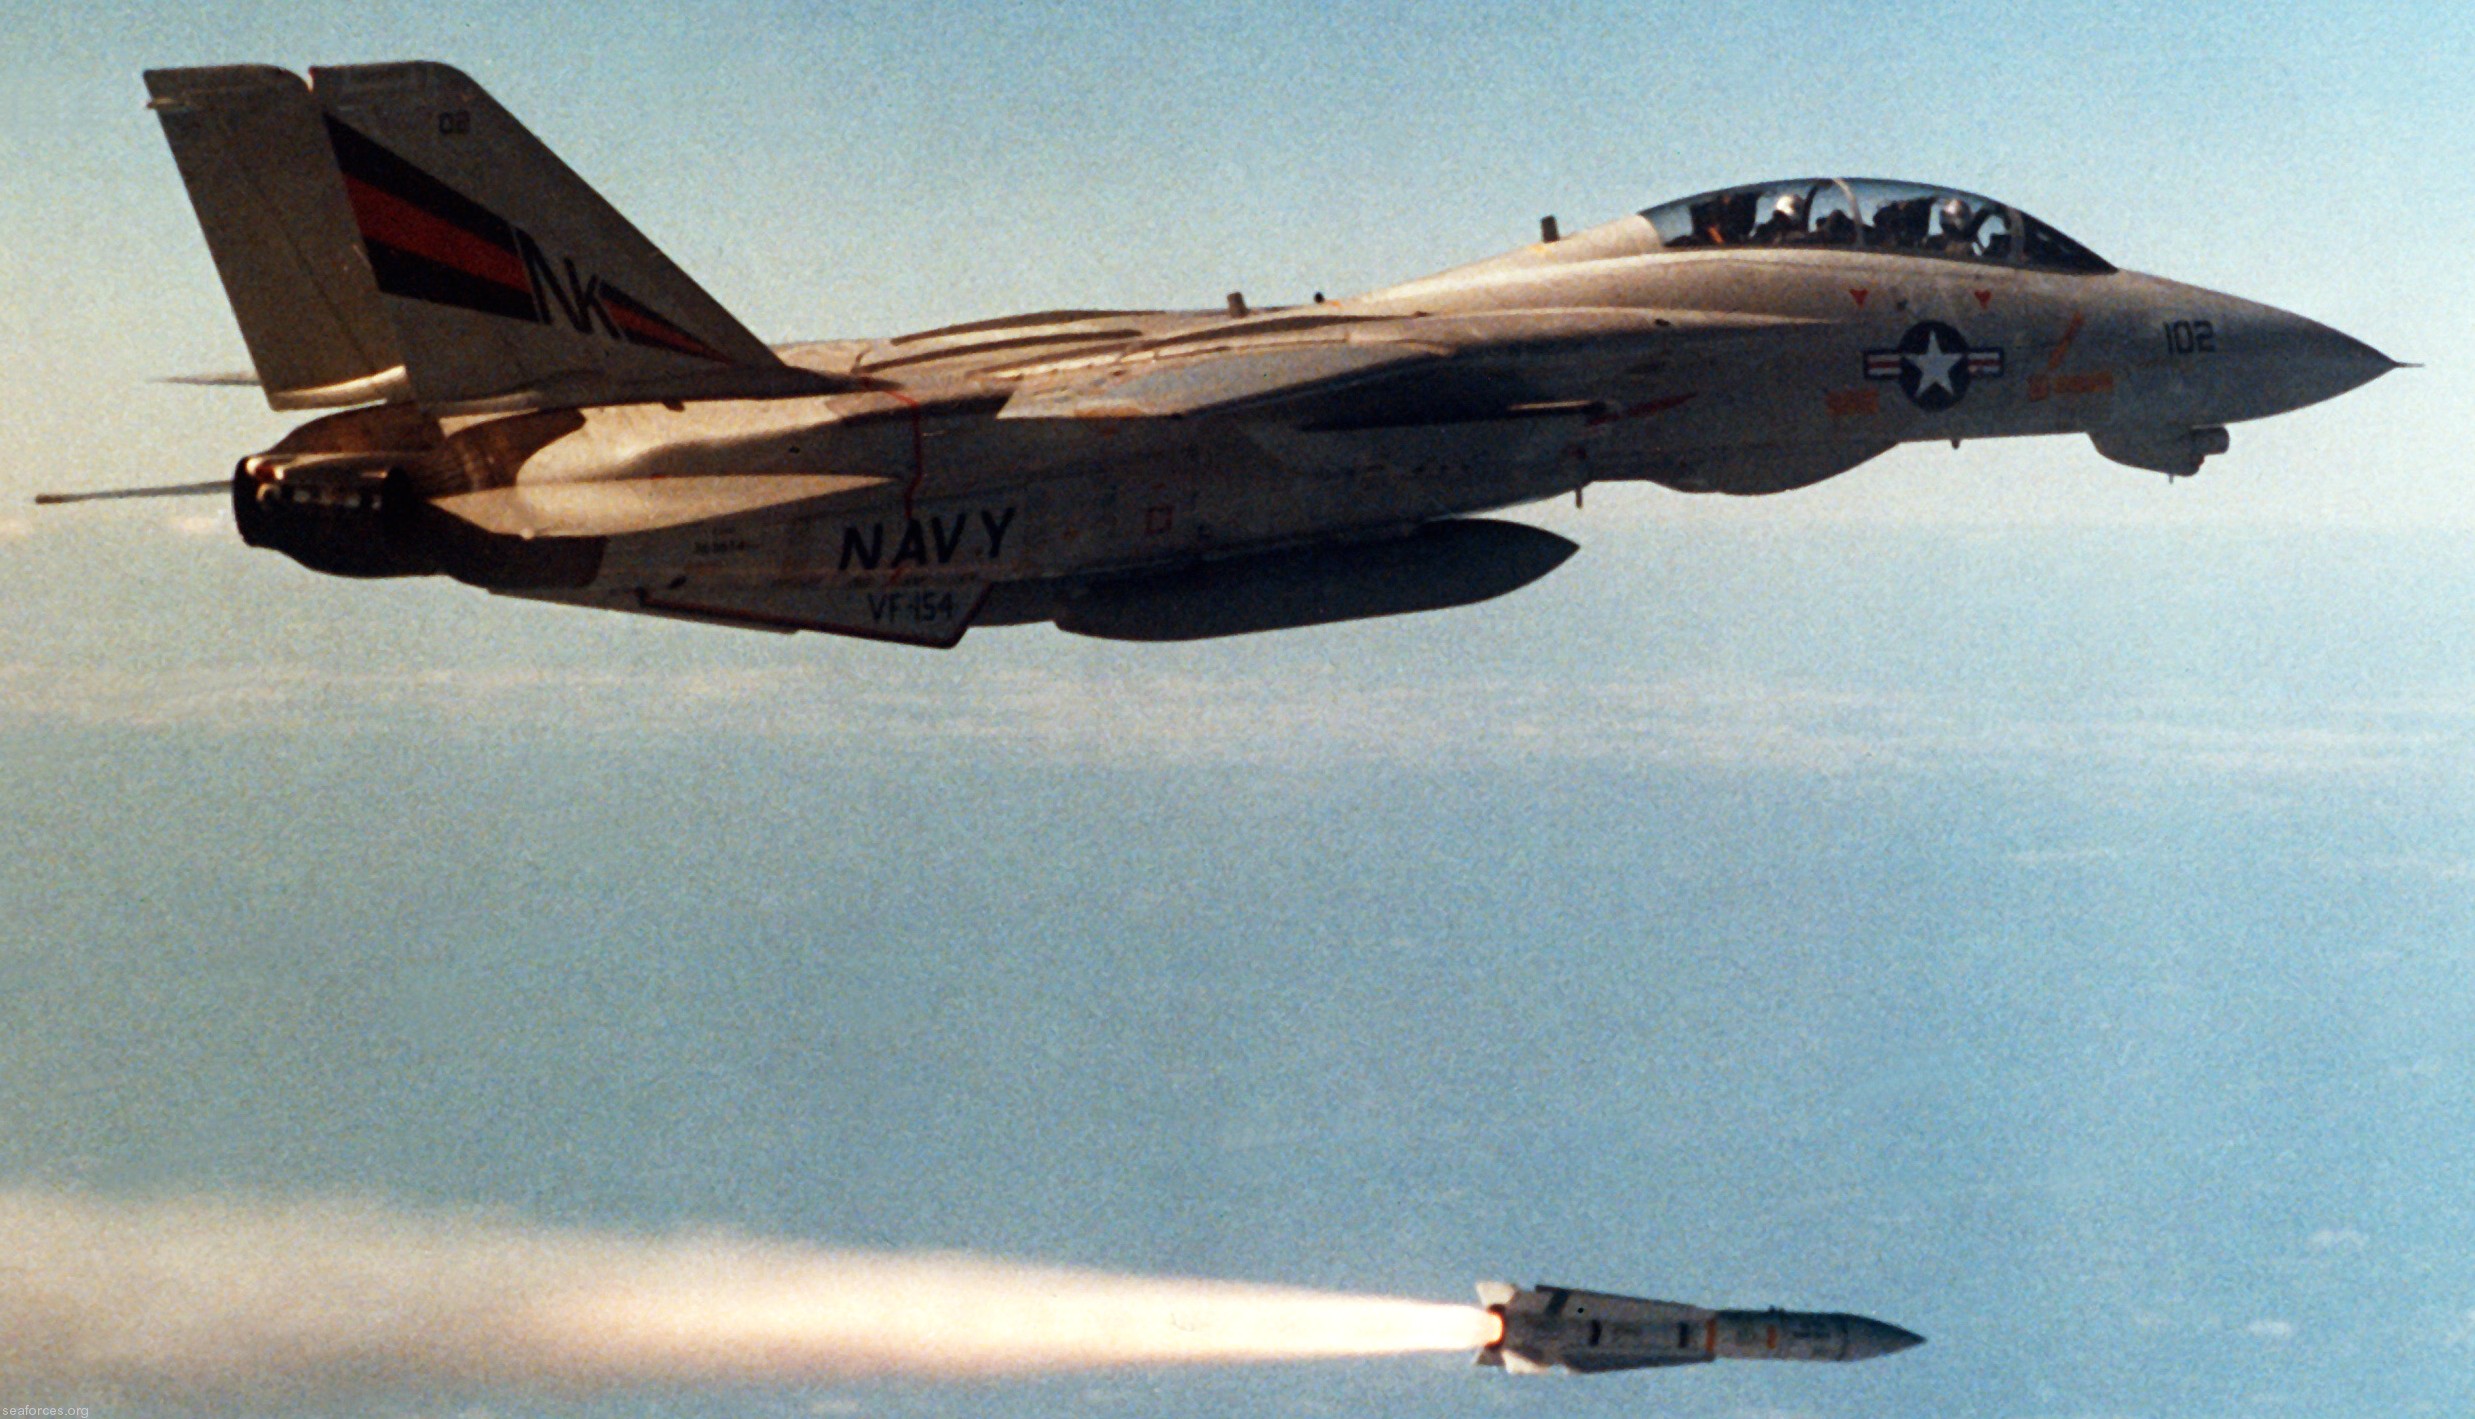 vf-154 black knights fighter squadron us navy f-14a tomcat carrier air wing cvw-14 47 aim-54c phoenix missile aam